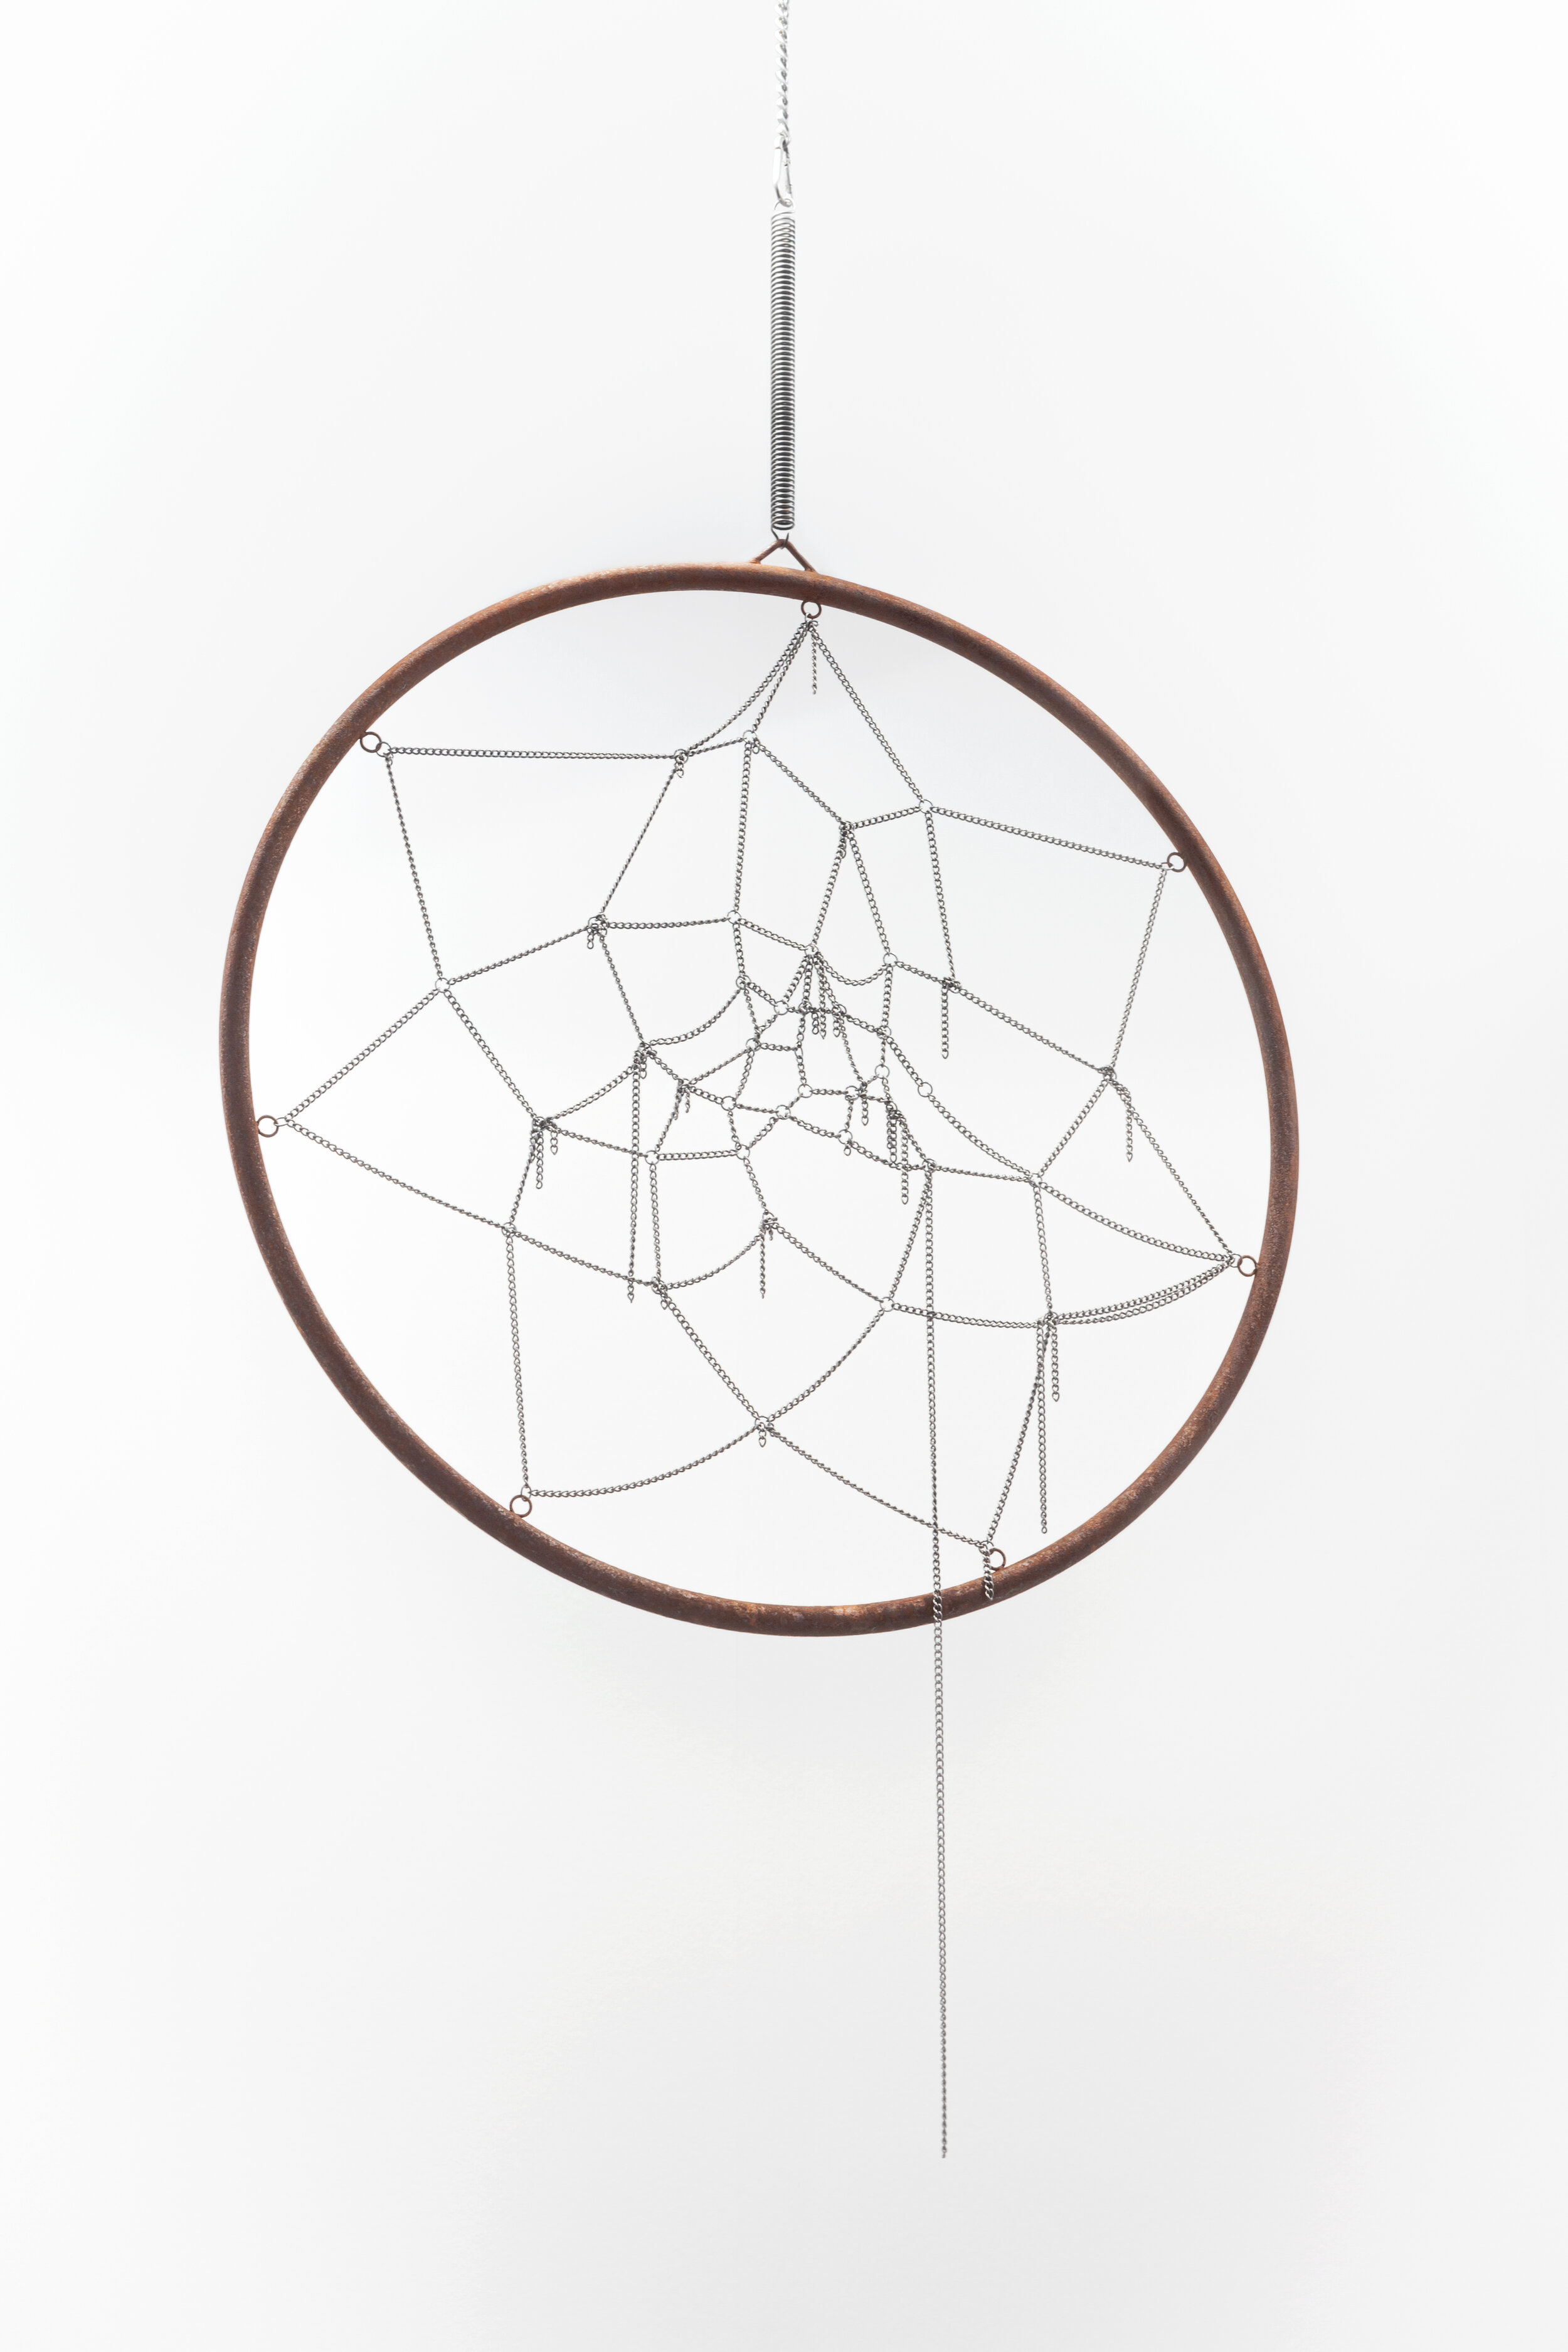  Bill Hayden,  Everyday can't be the same ,   2019. Powder-coated steel, chain, jumprings, 27” diameter, 3/4" tube.         